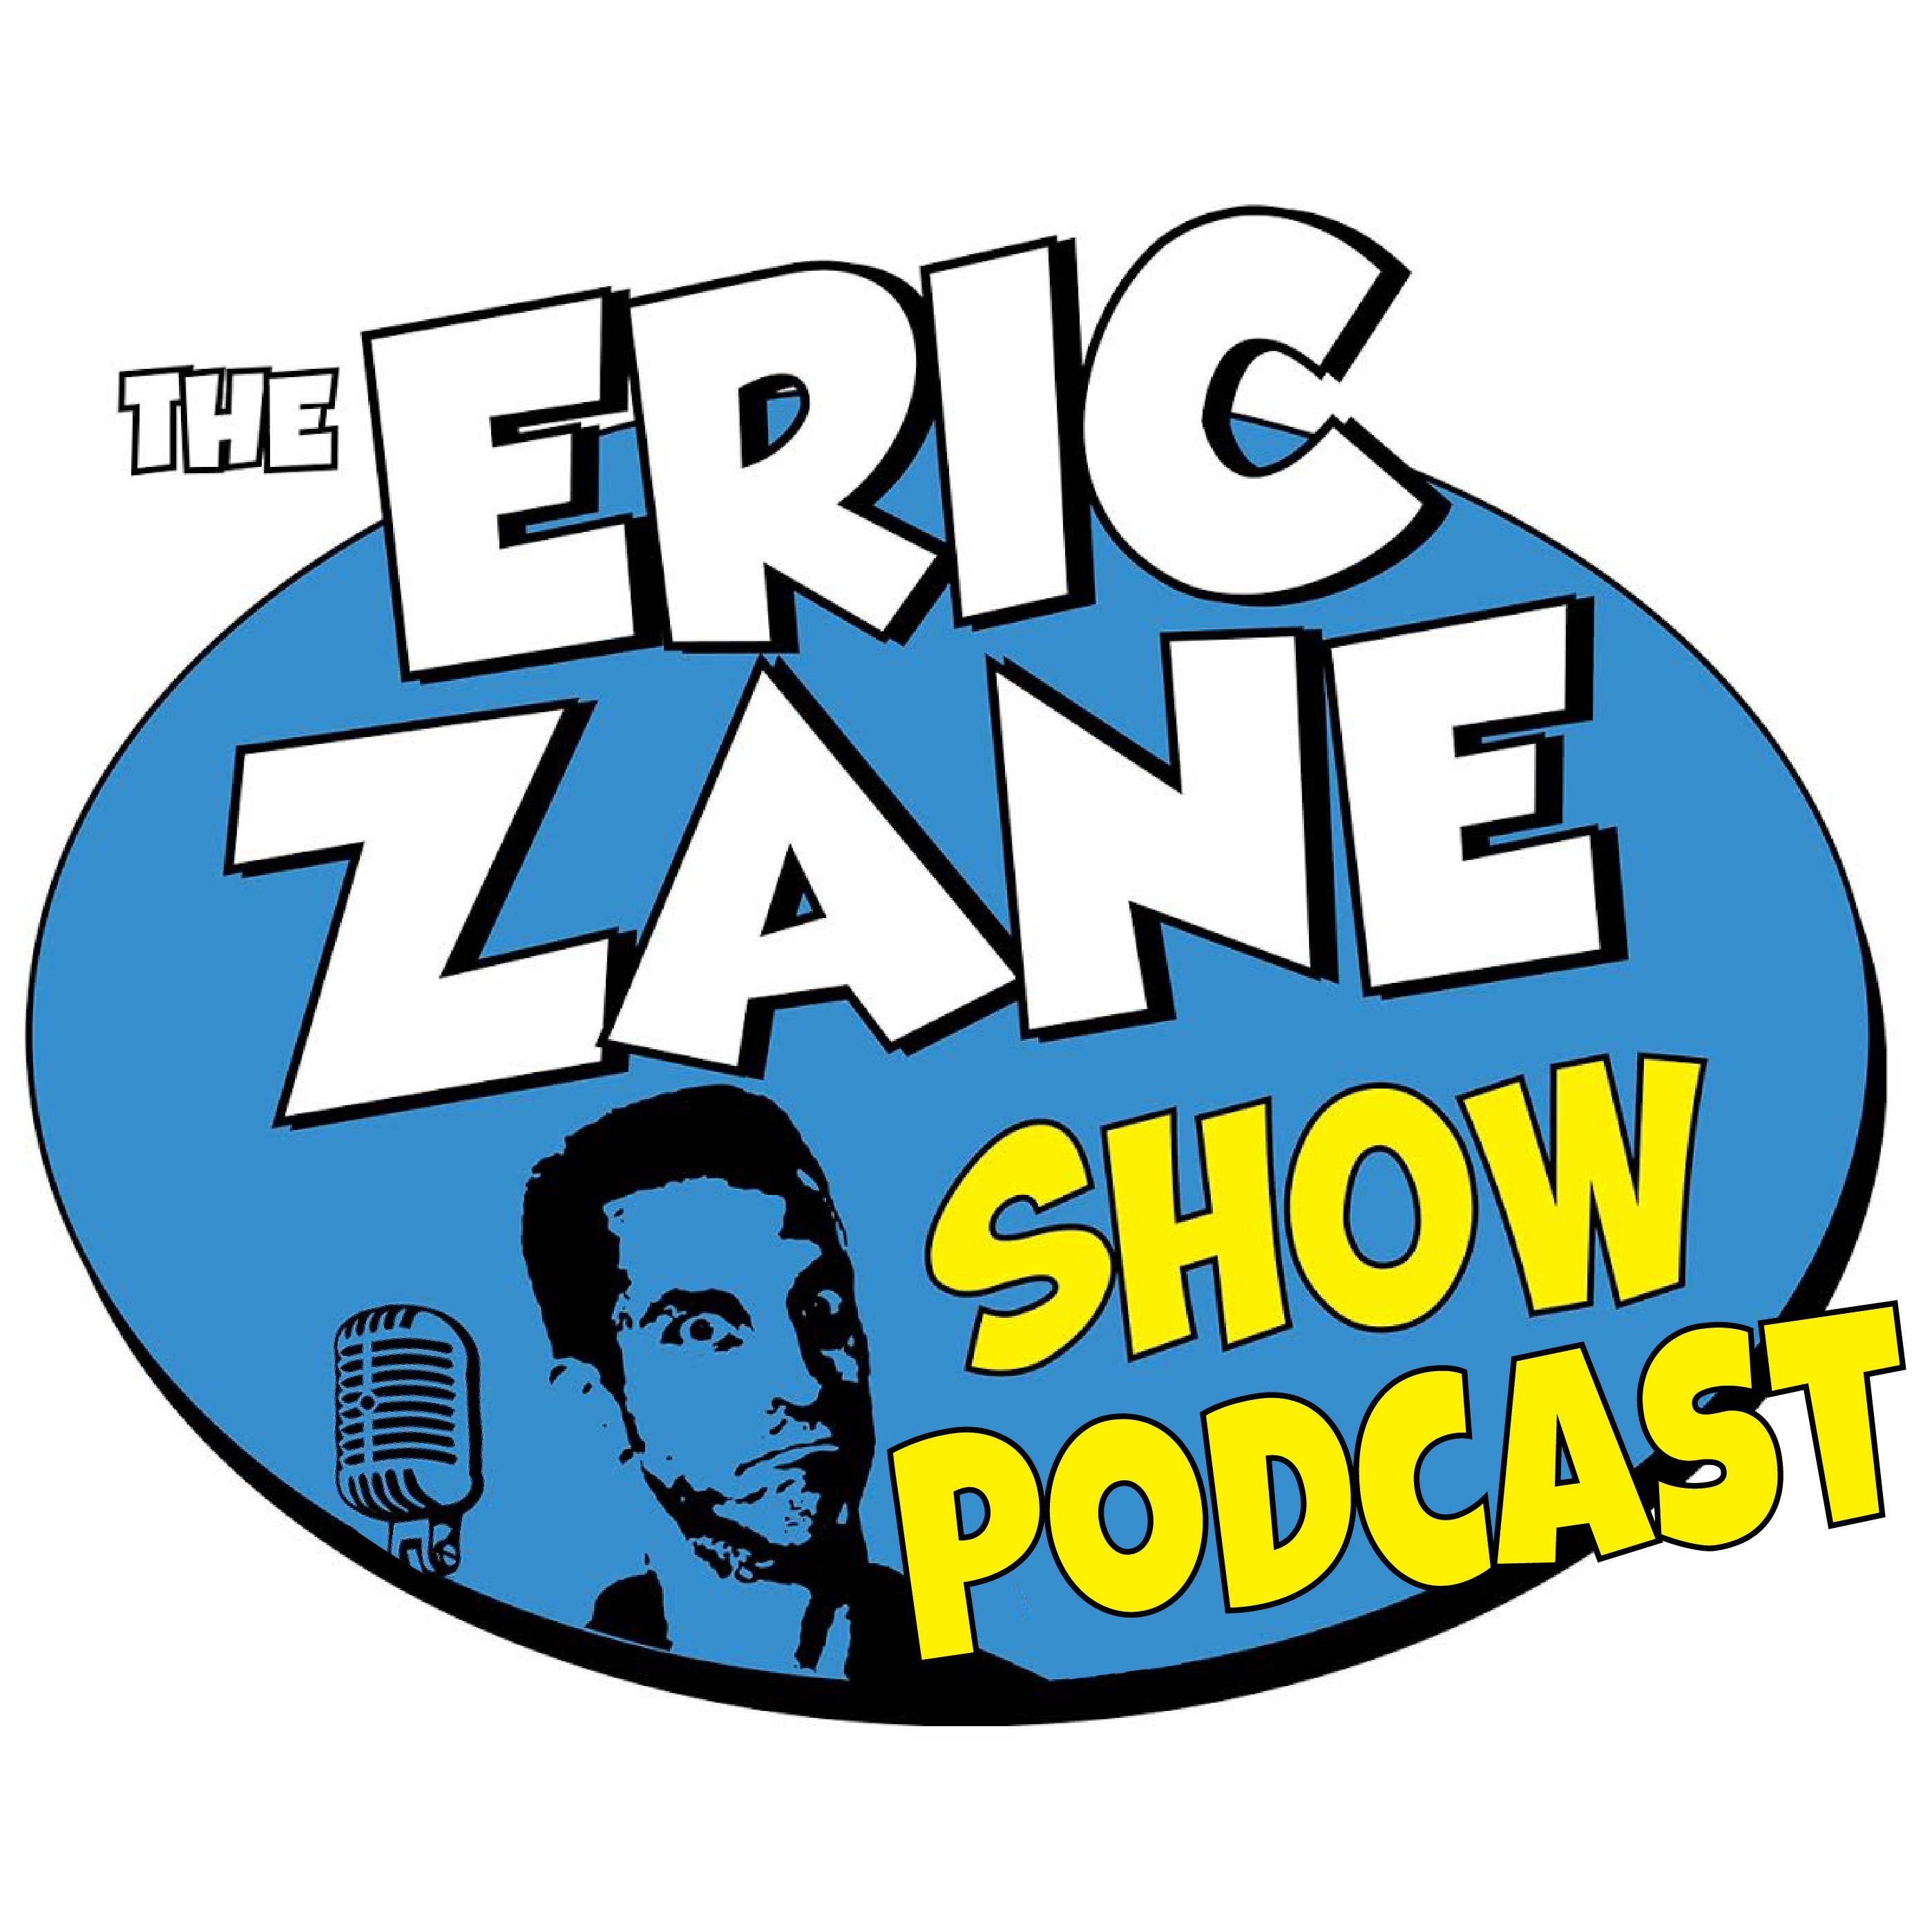 Not the Best of The Eric Zane Show Podcast